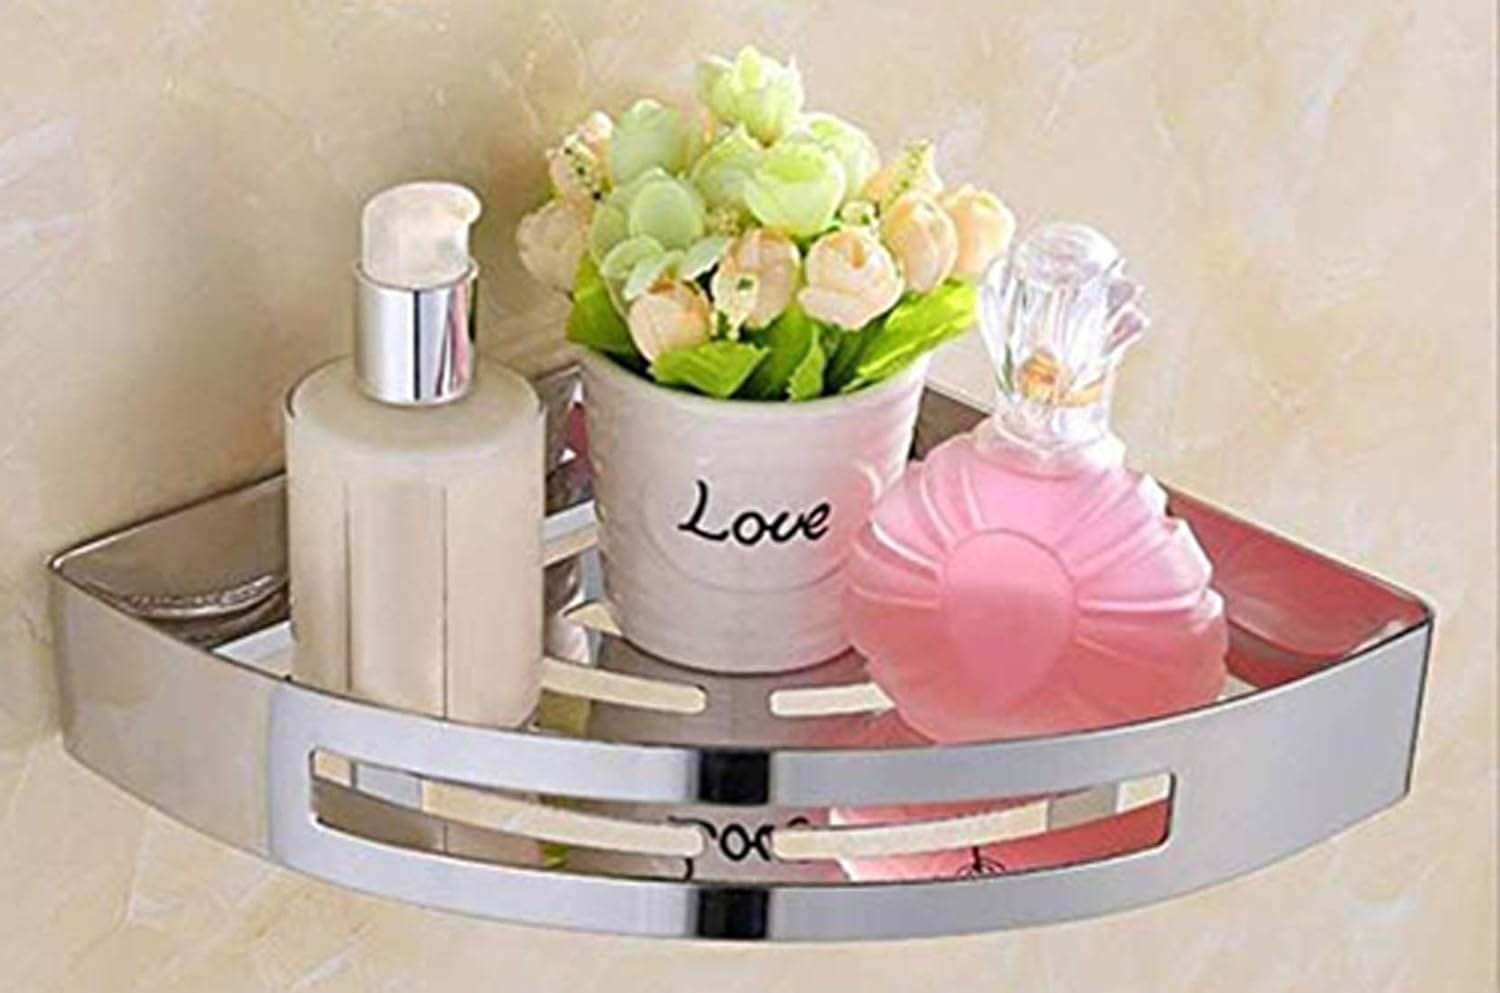 Shop Bathroom Stainless Steel Chrome Corner Shower Caddy Basket - L8303 | Buy Online at Supply Master Accra, Ghana Bathroom Accessories Buy Tools hardware Building materials